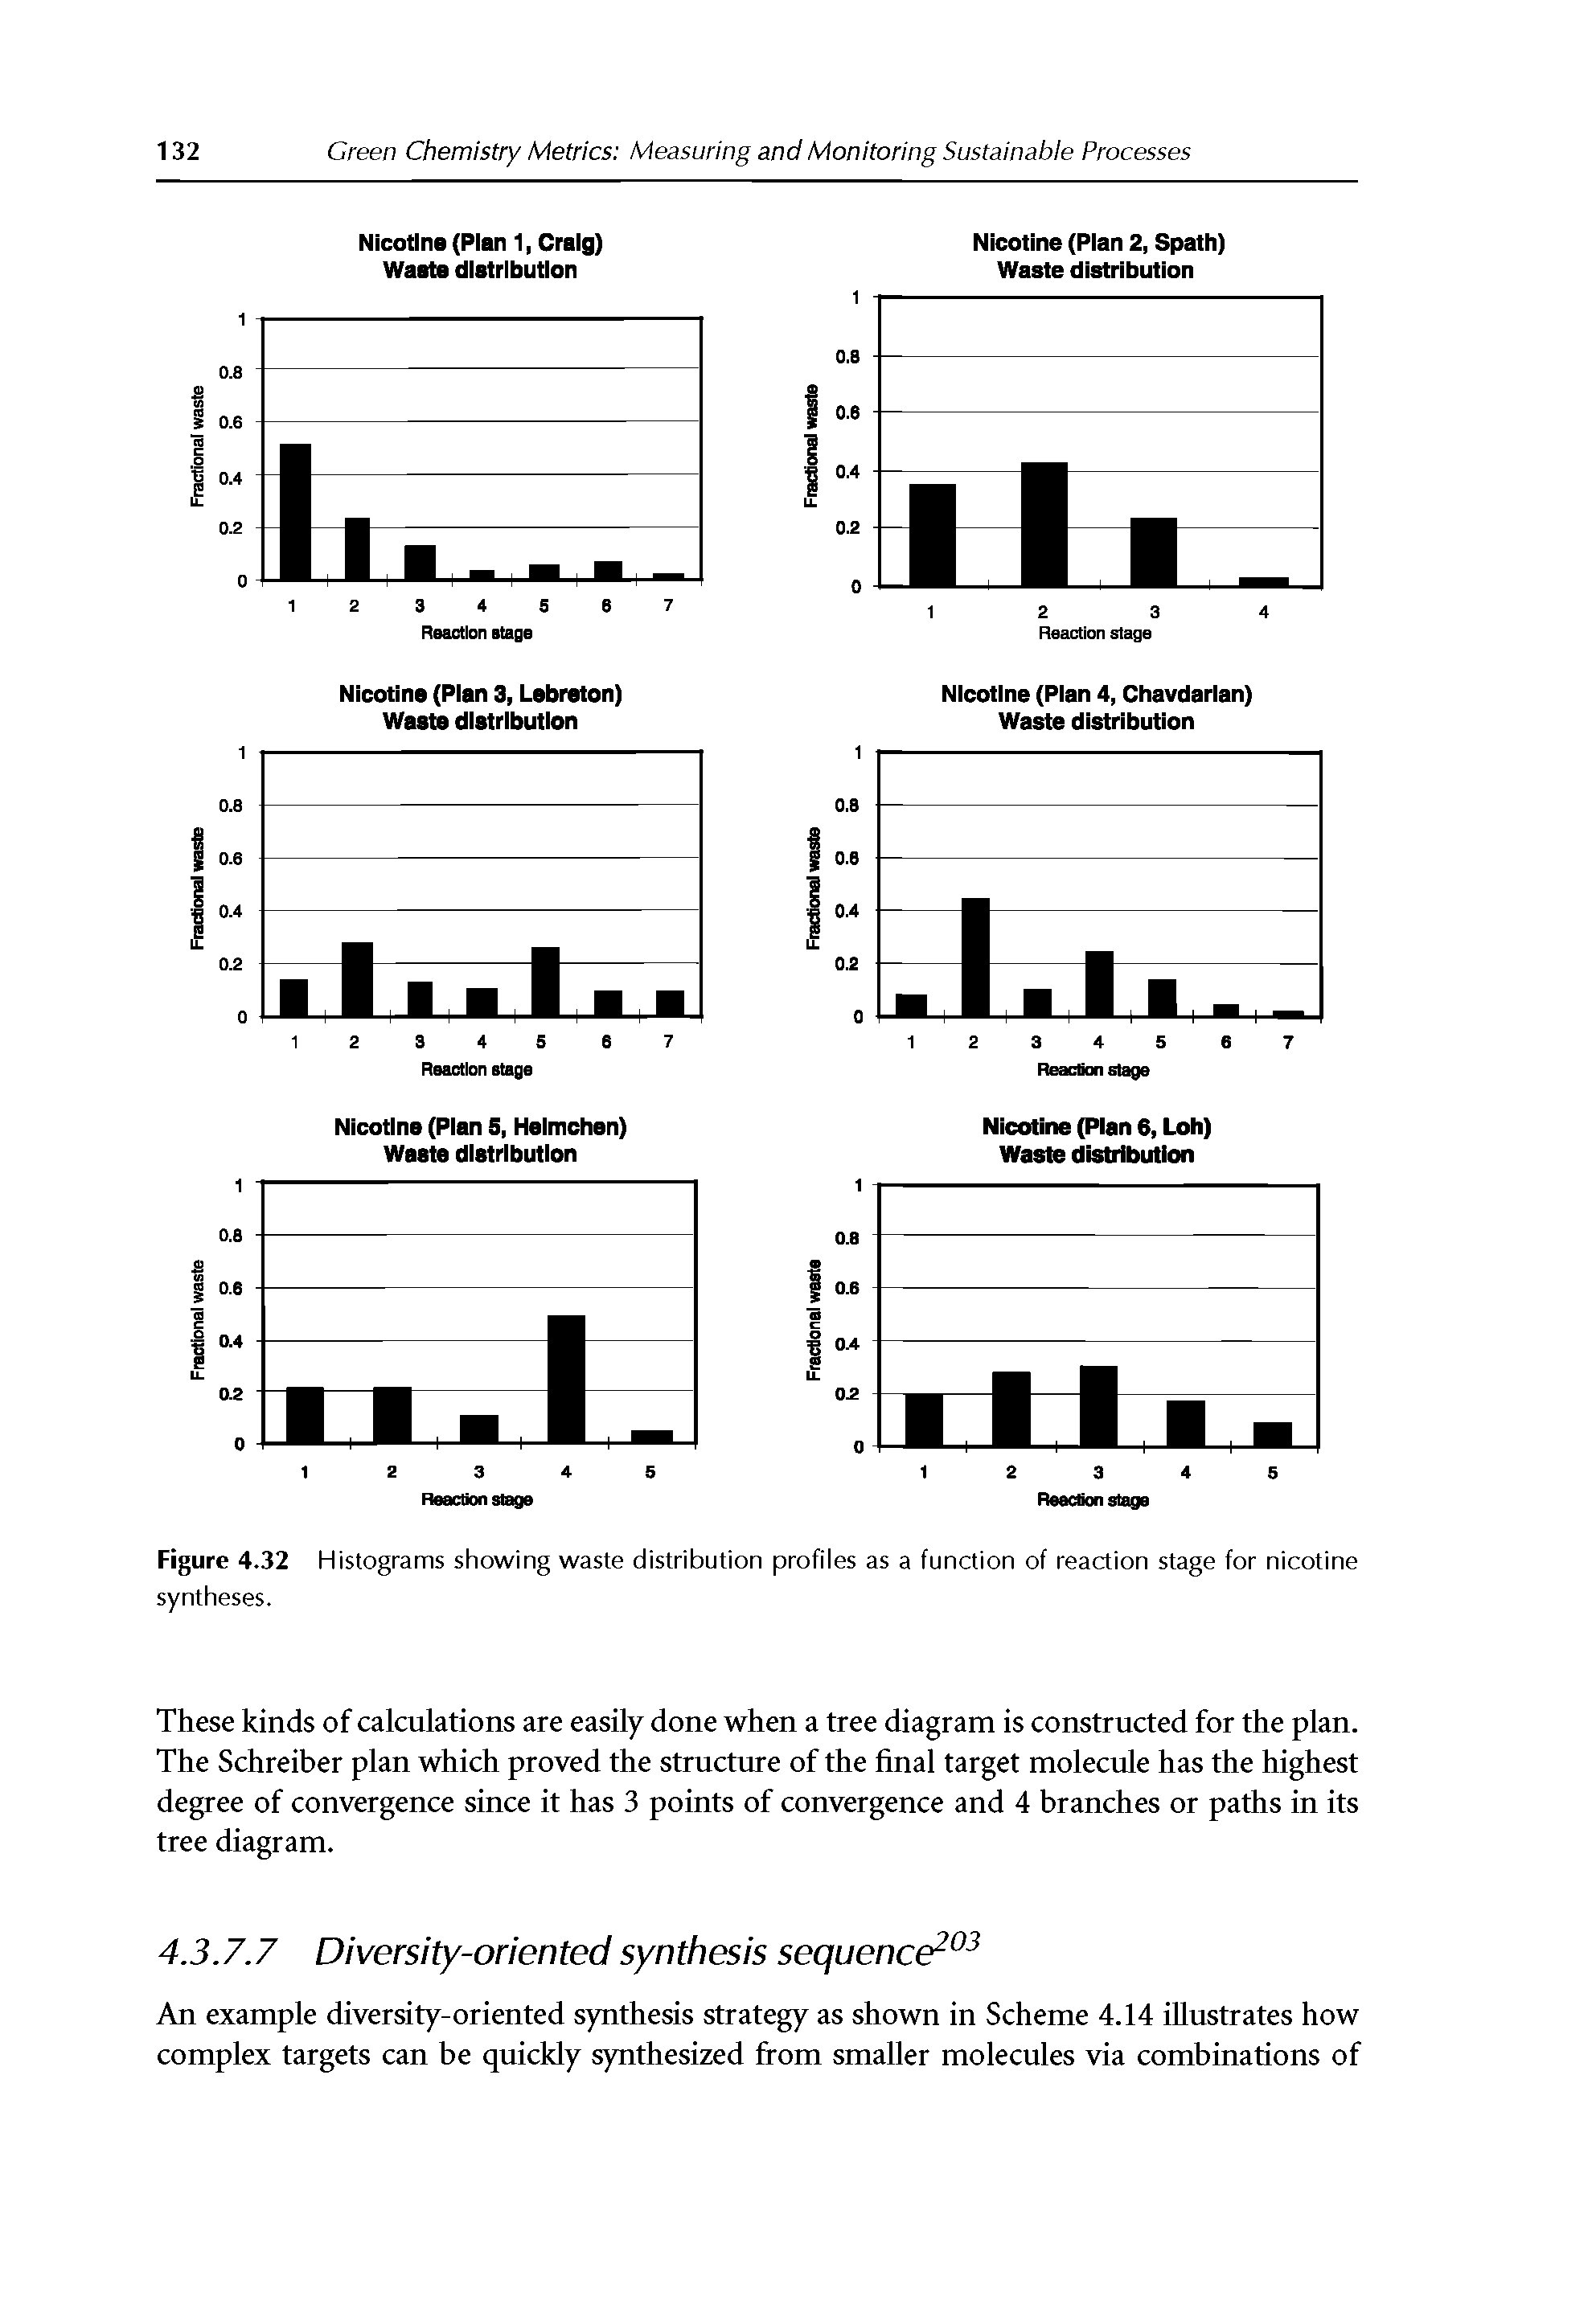 Figure 4.32 Histograms showing waste distribution profiies as a function of reaction stage for nicotine syntheses.